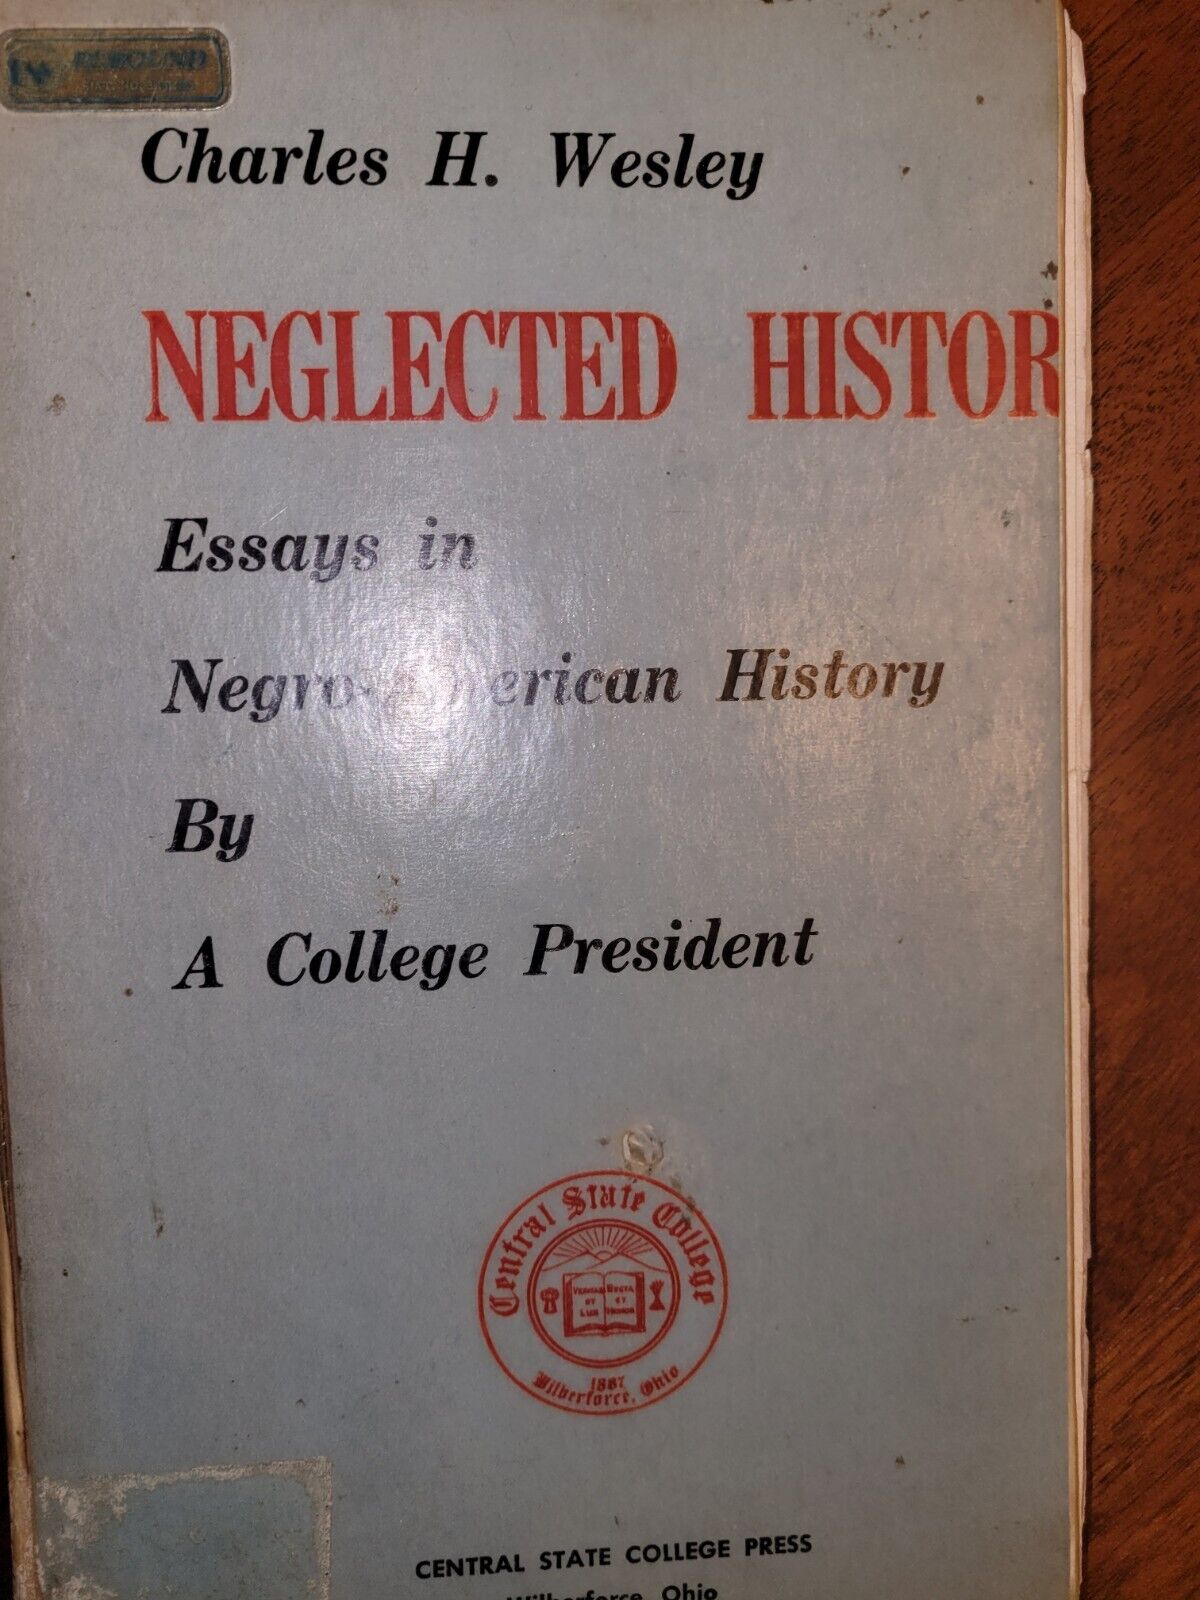 Neglected (Negro) American History Signed & Inscribed by Charles H. Wesley 1969